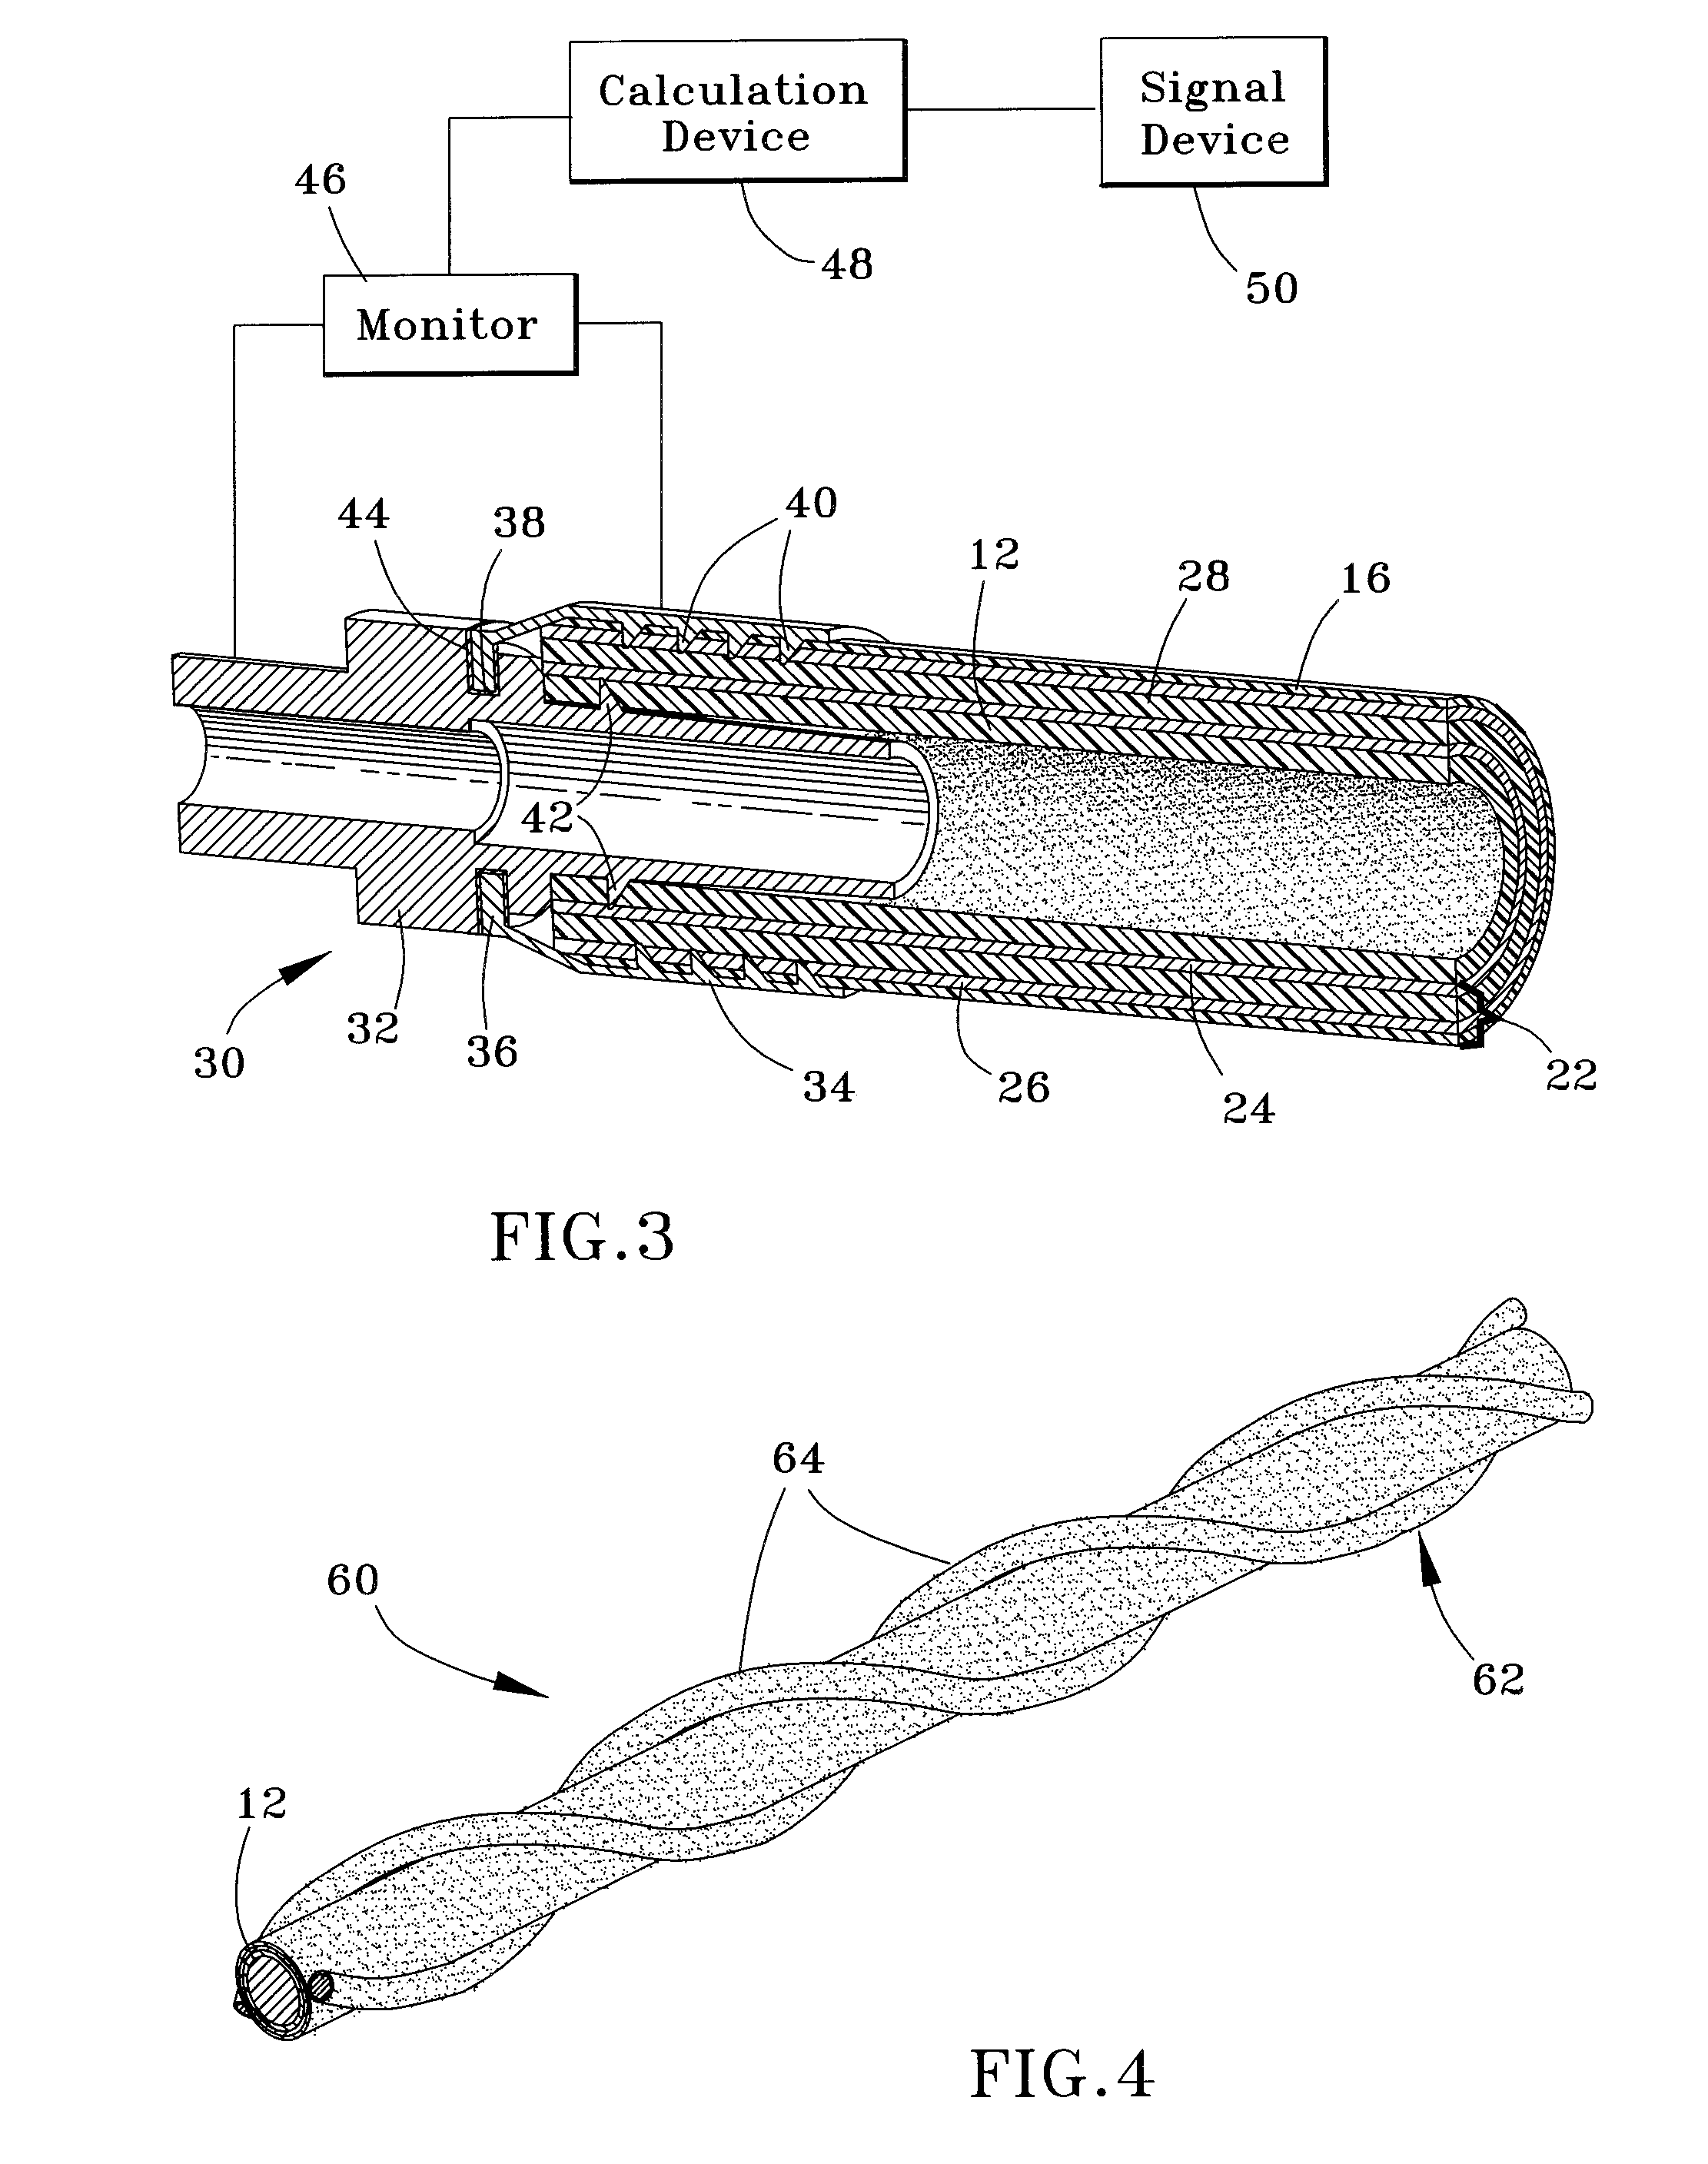 Hydraulic hose with integral life-sensing capability and method therefor